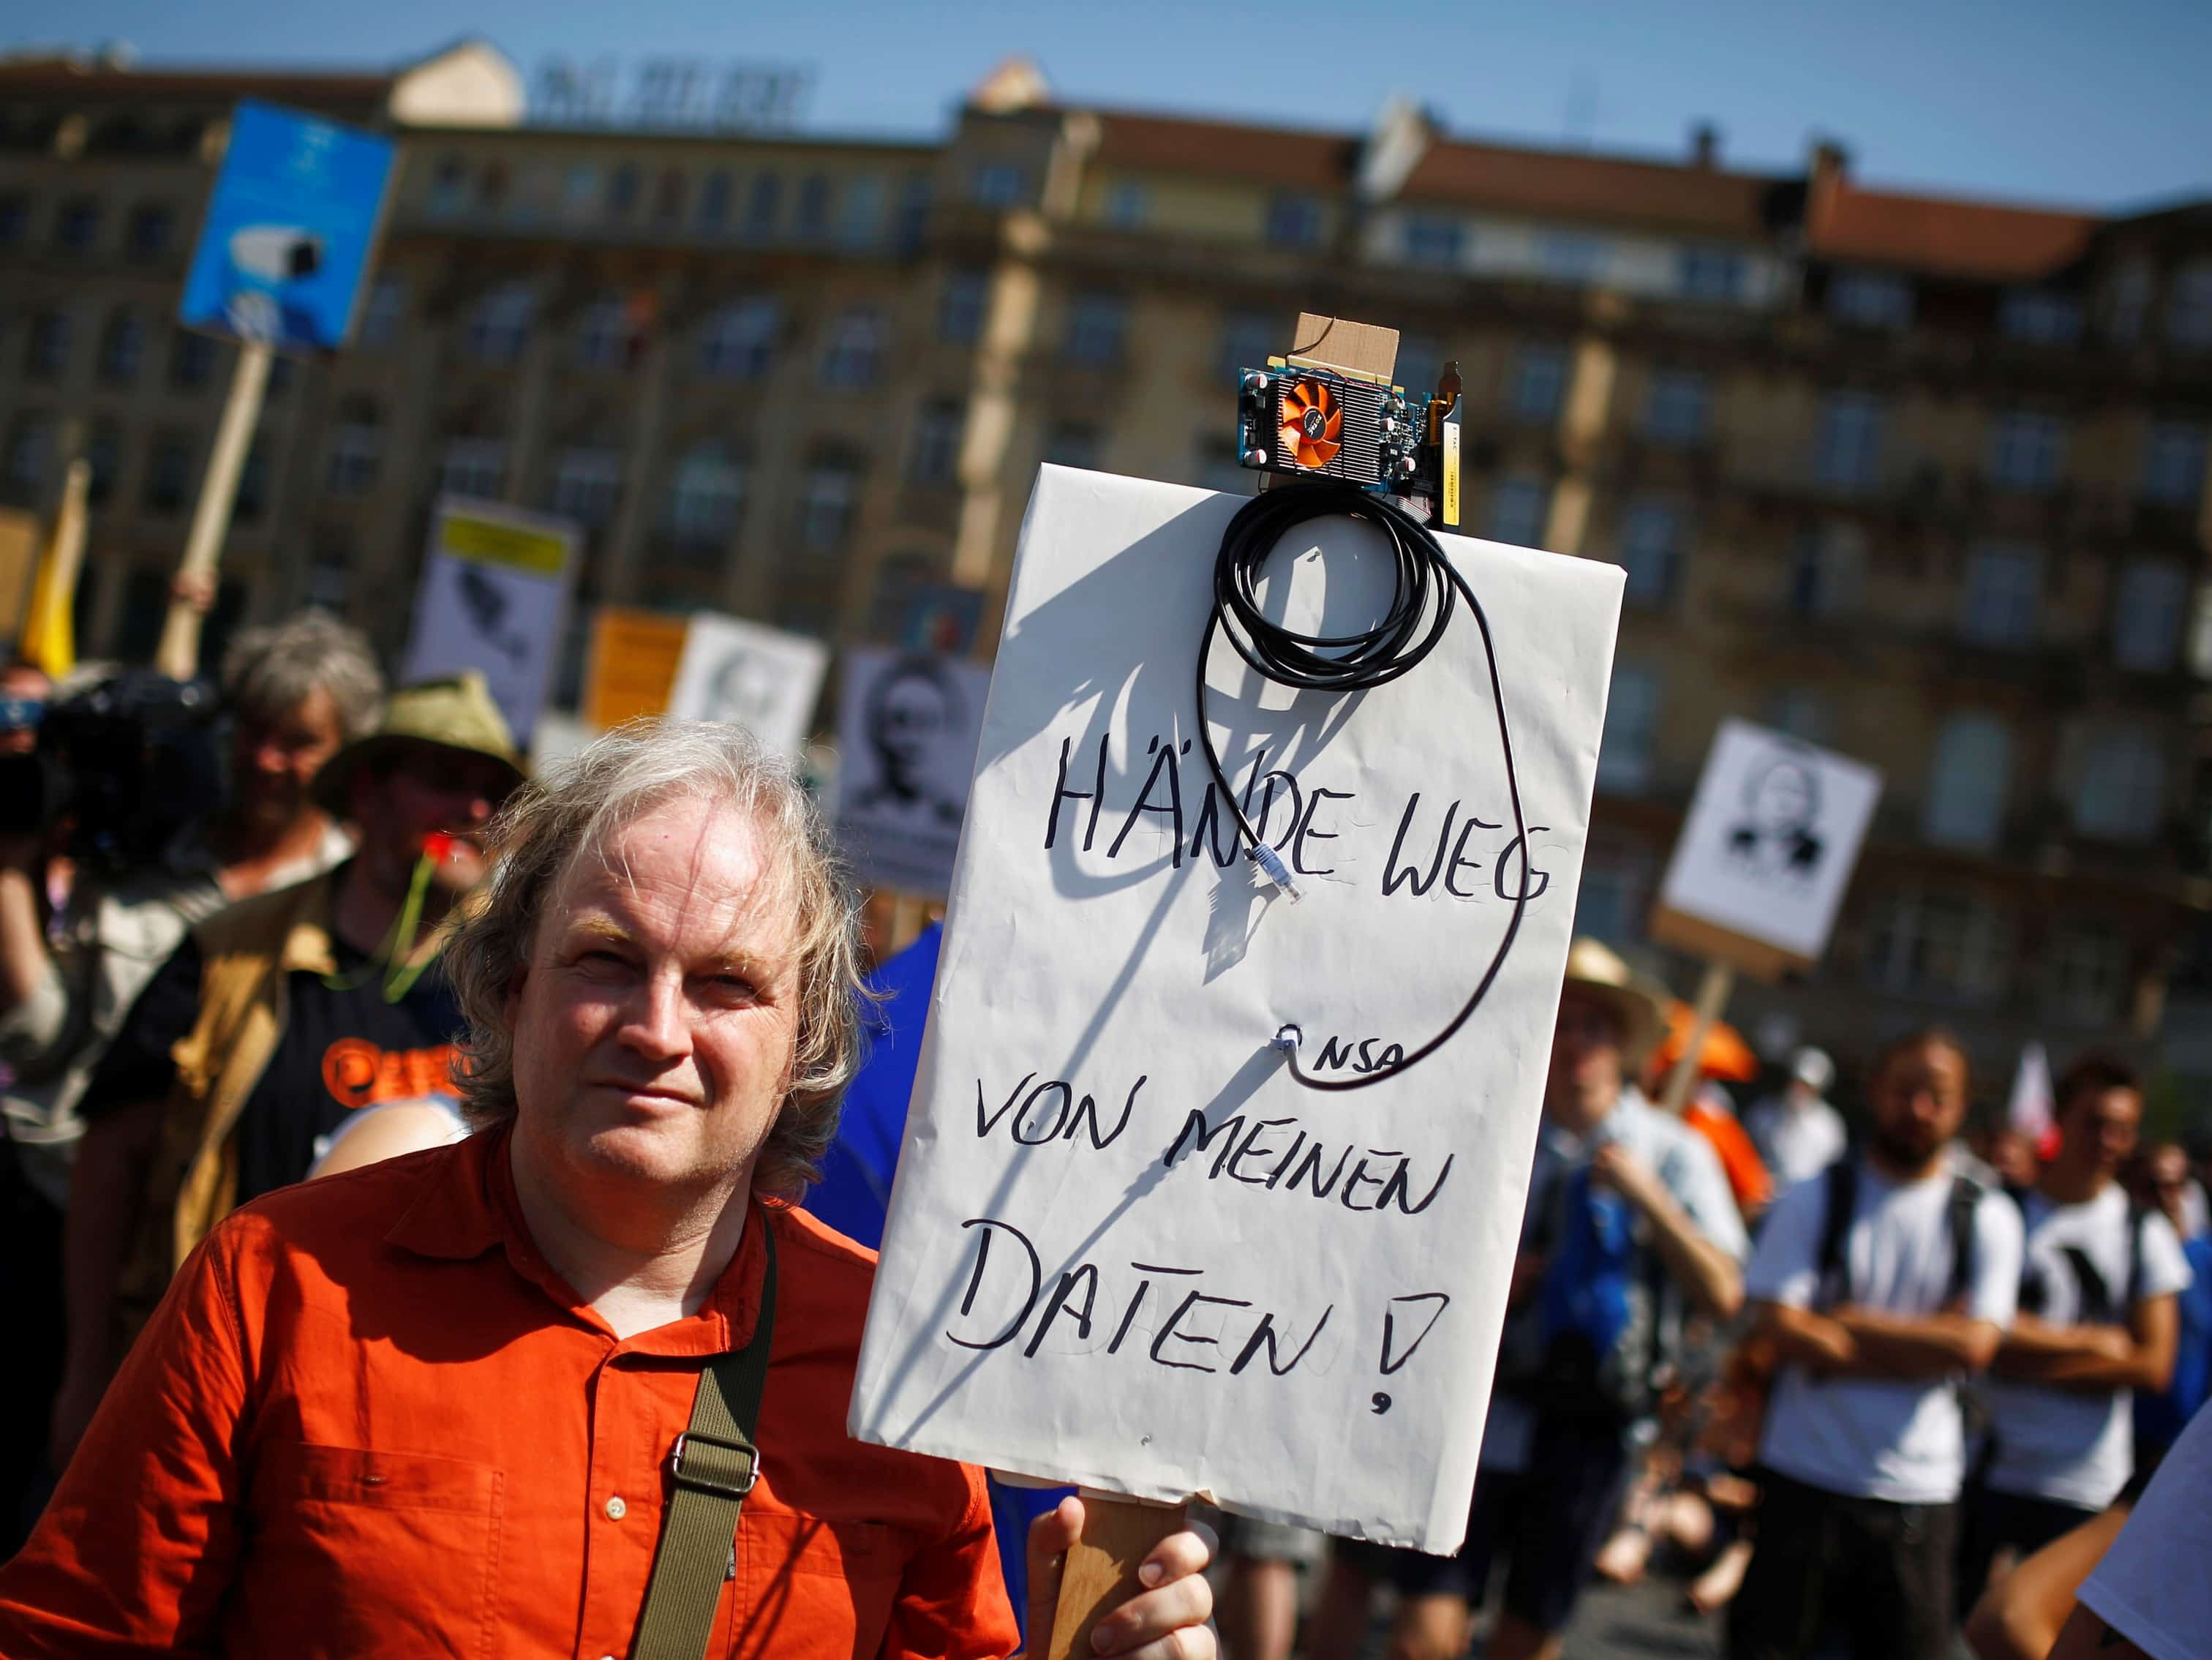 A protester holds a placard which reads "Hands off my data" during a demonstration in Frankfurt, Germany, 27 July 2013, REUTERS/ Kai Pfaffenbach